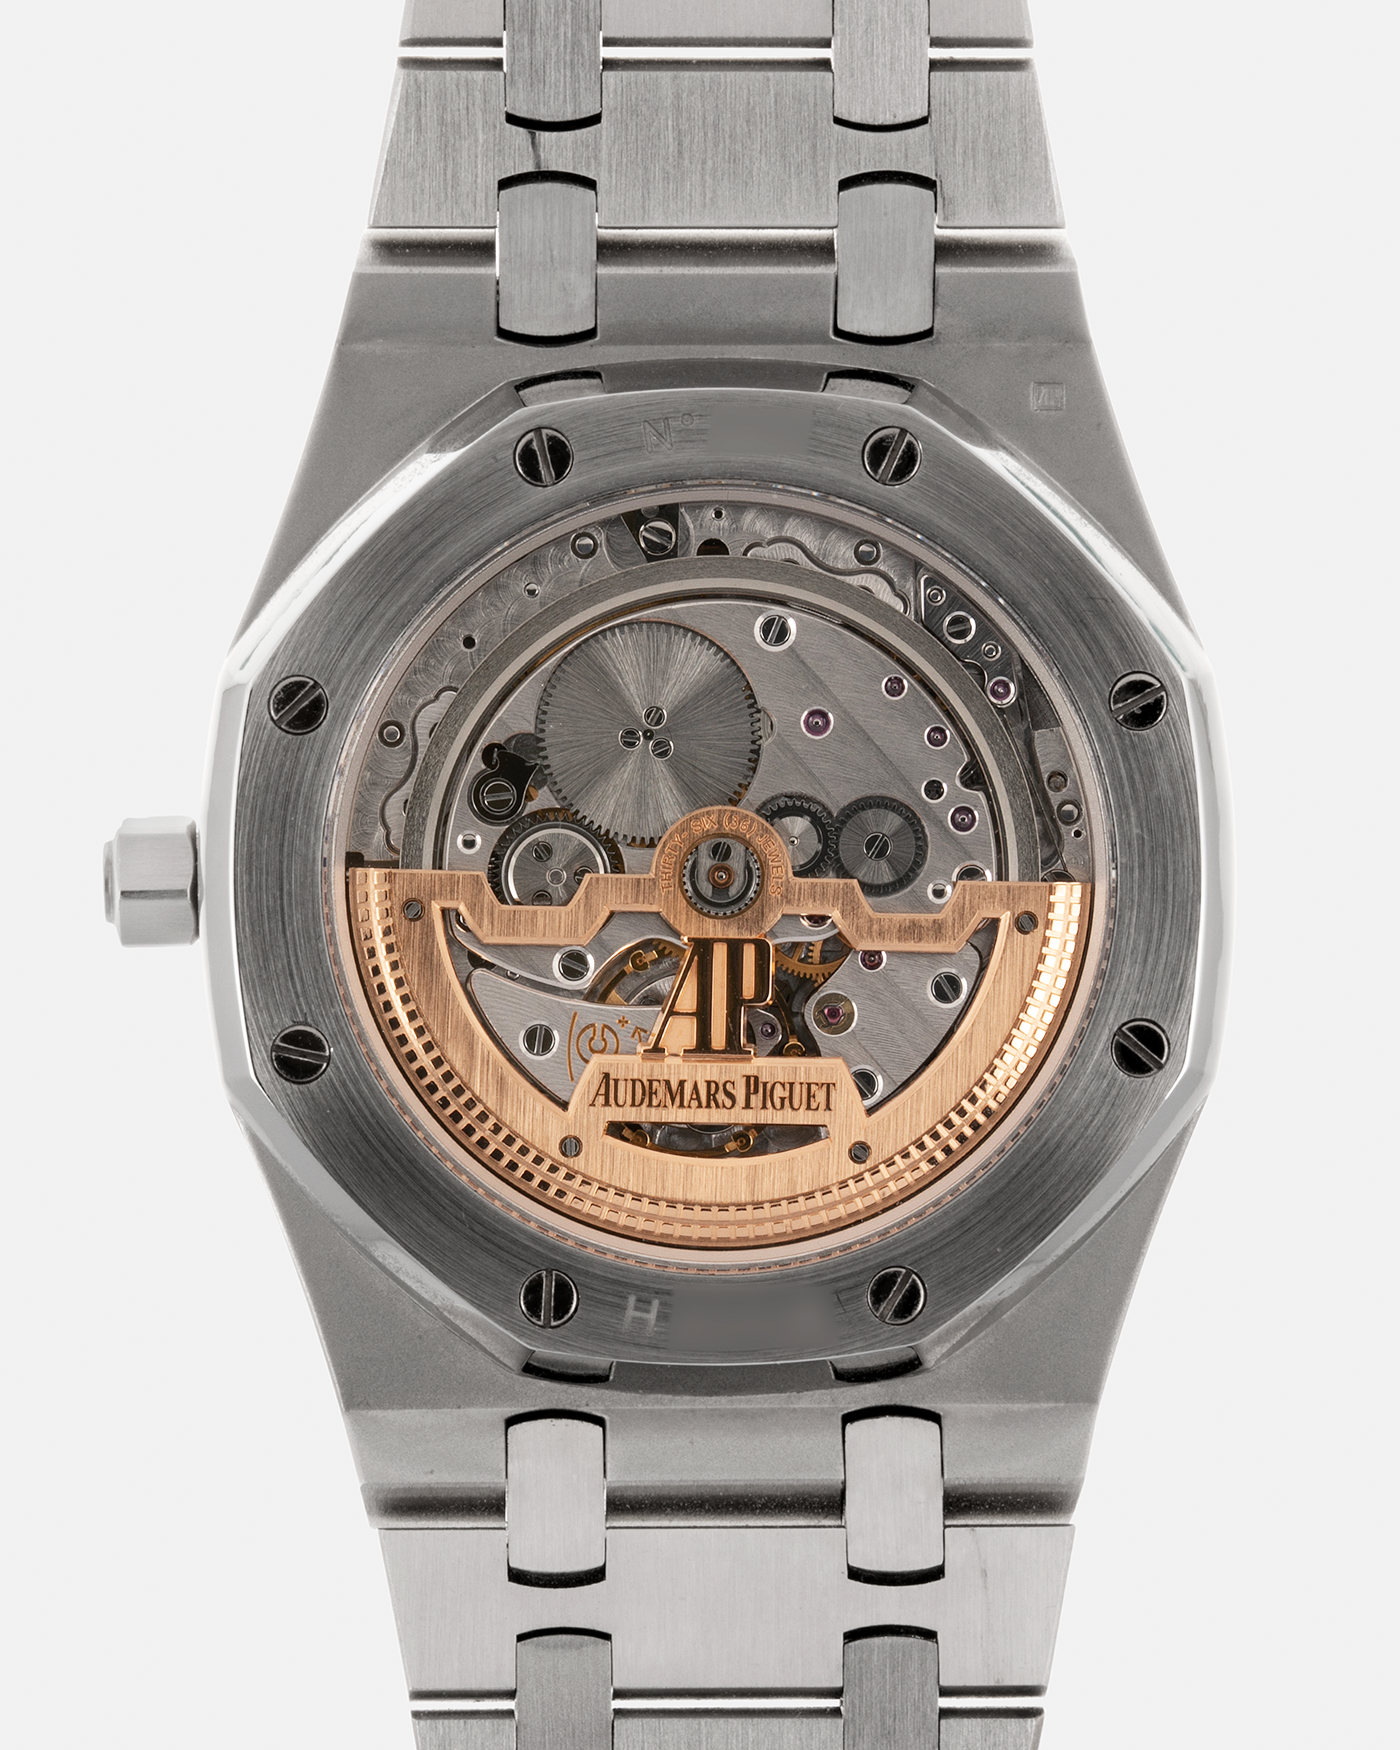 Brand: Audemars Piguet Year: 2014 Model: Royal Oak Reference Number: 15202ST.OO.1240ST.01 Material: Stainless Steel Movement: Audemars Piguet Cal. 2121 (Derived from JLC Cal. 920), Self-Winding Case Dimensions: 39mm x 8.1mm Bracelet: Audemars Piguet Stainless Steel Integrated Bracelet